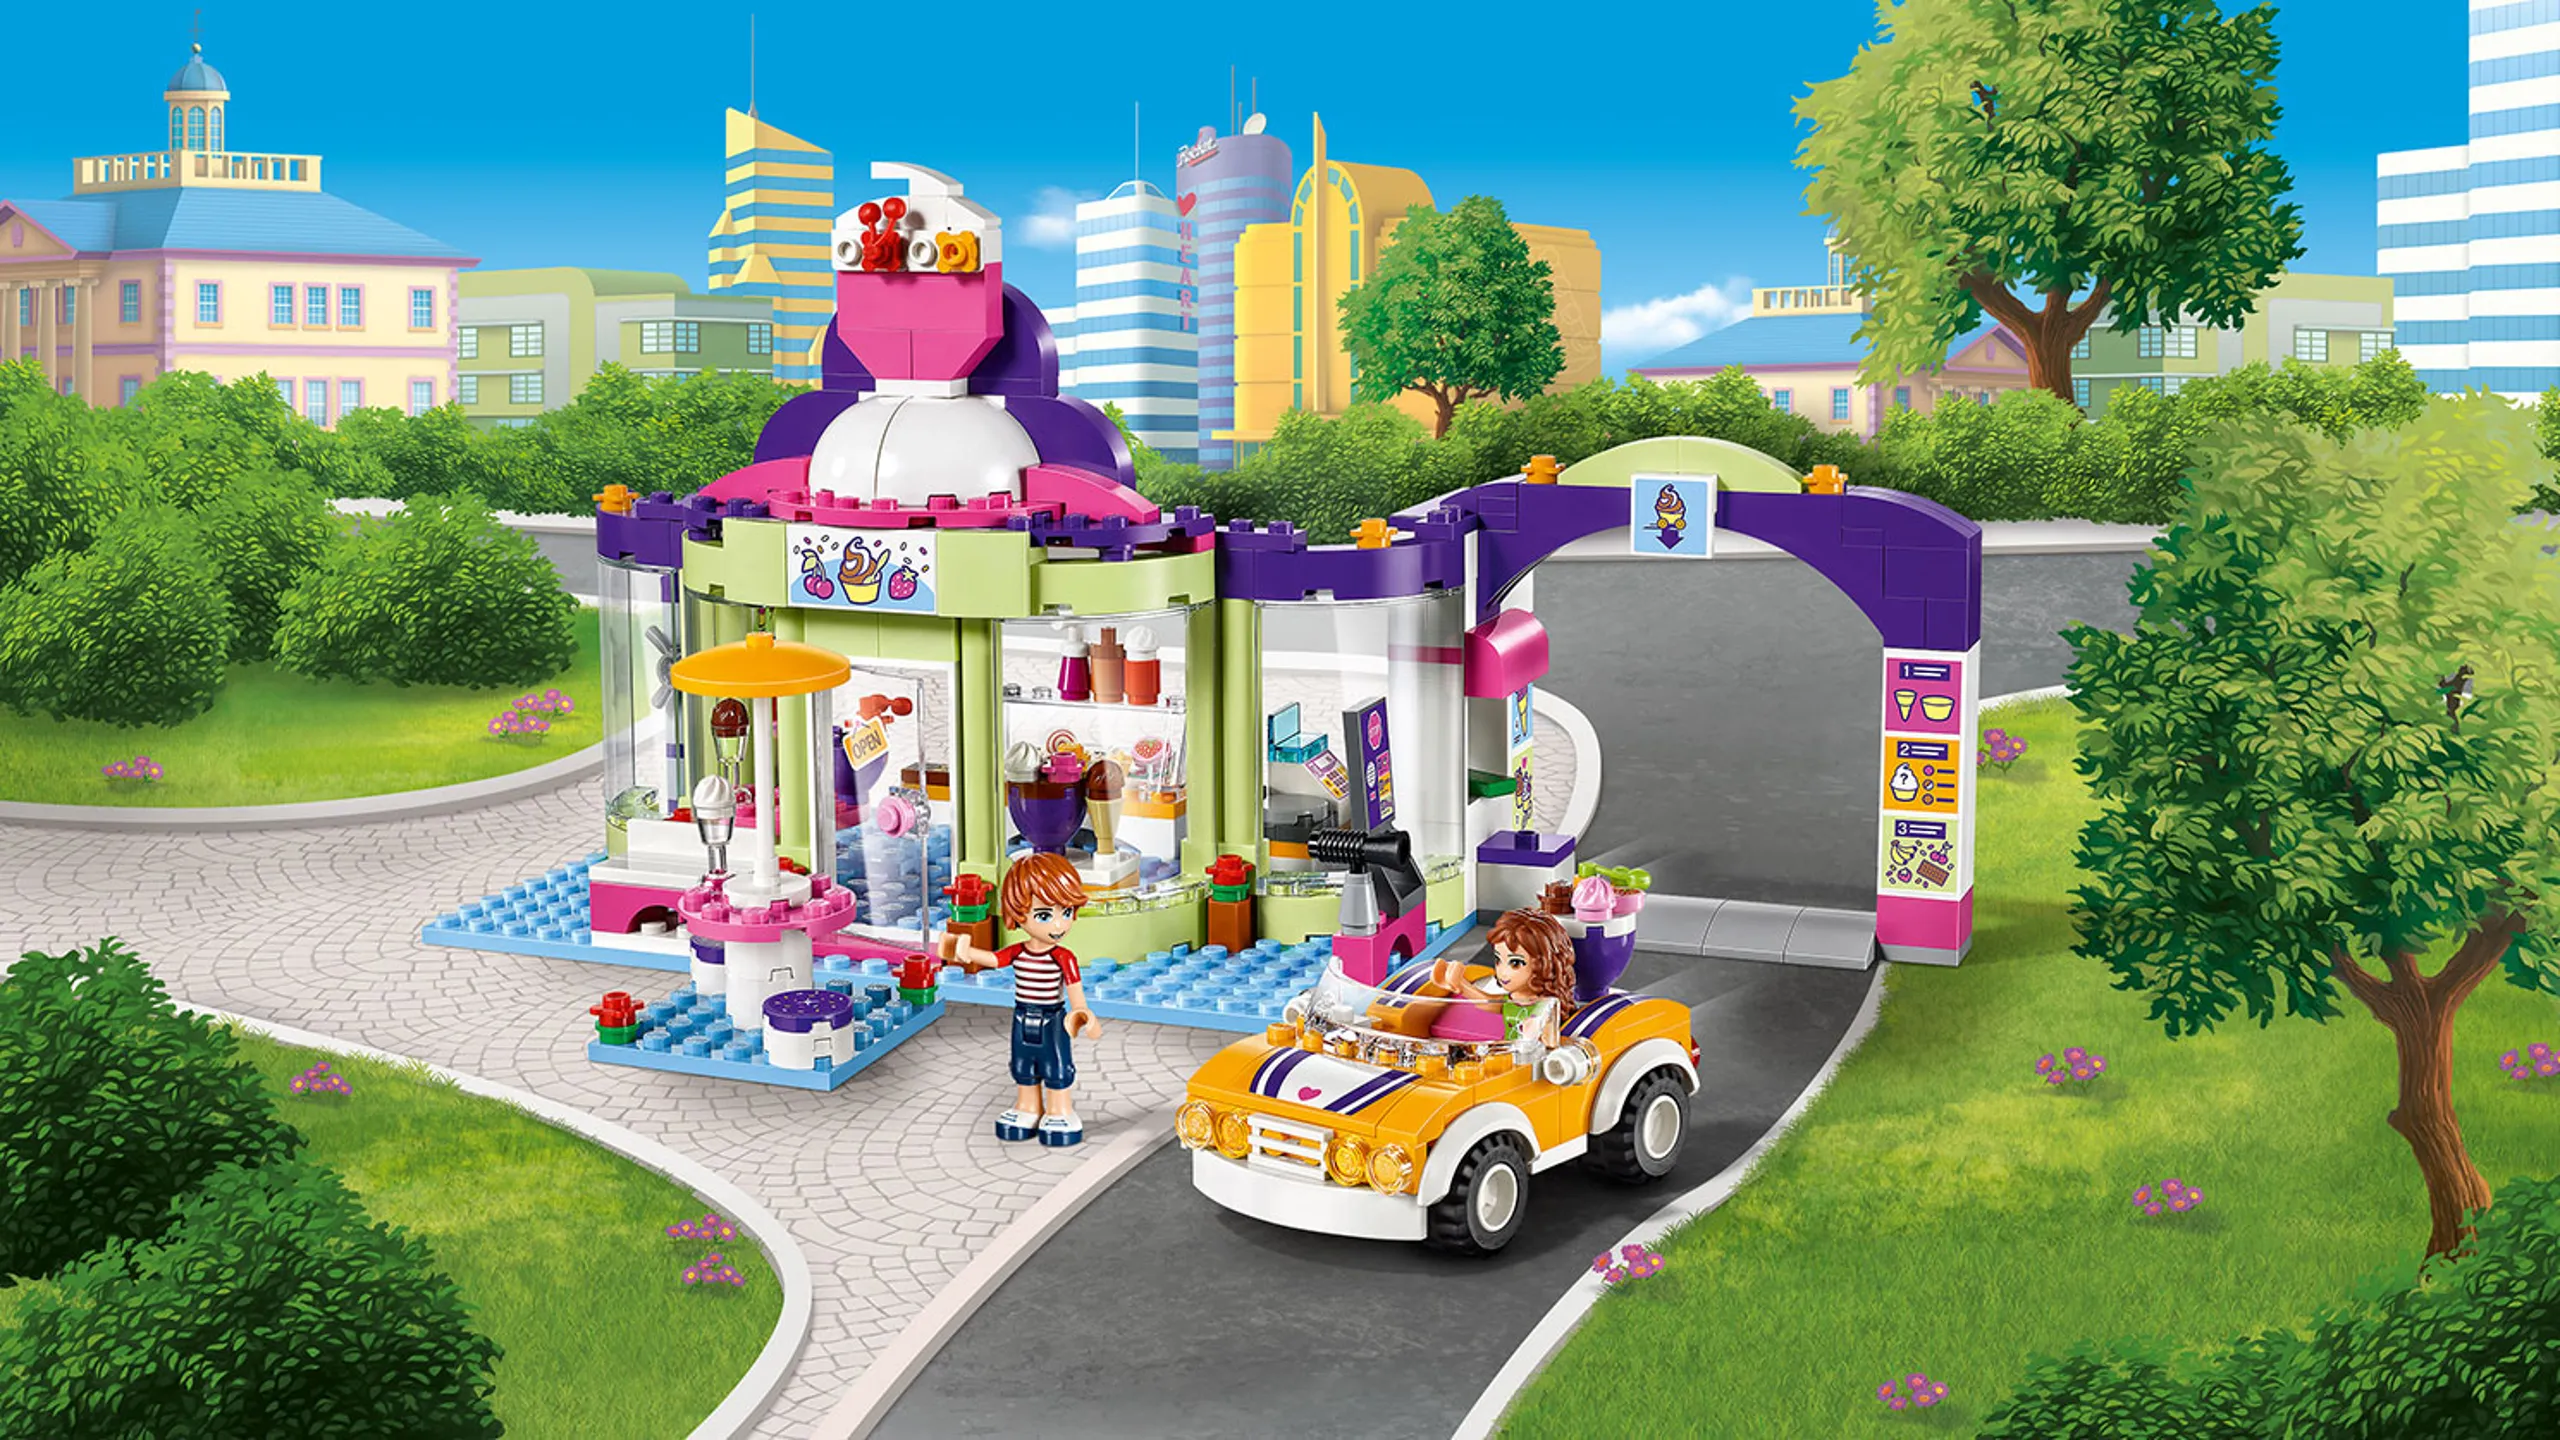 LEGO Friends - 41320 Heartlake Frozen Yogurt Shop - Olivia arrives in her car to the Frozen Yogurt Shop to meet up with Julian and chill out at Heartlake’s coolest hangout!